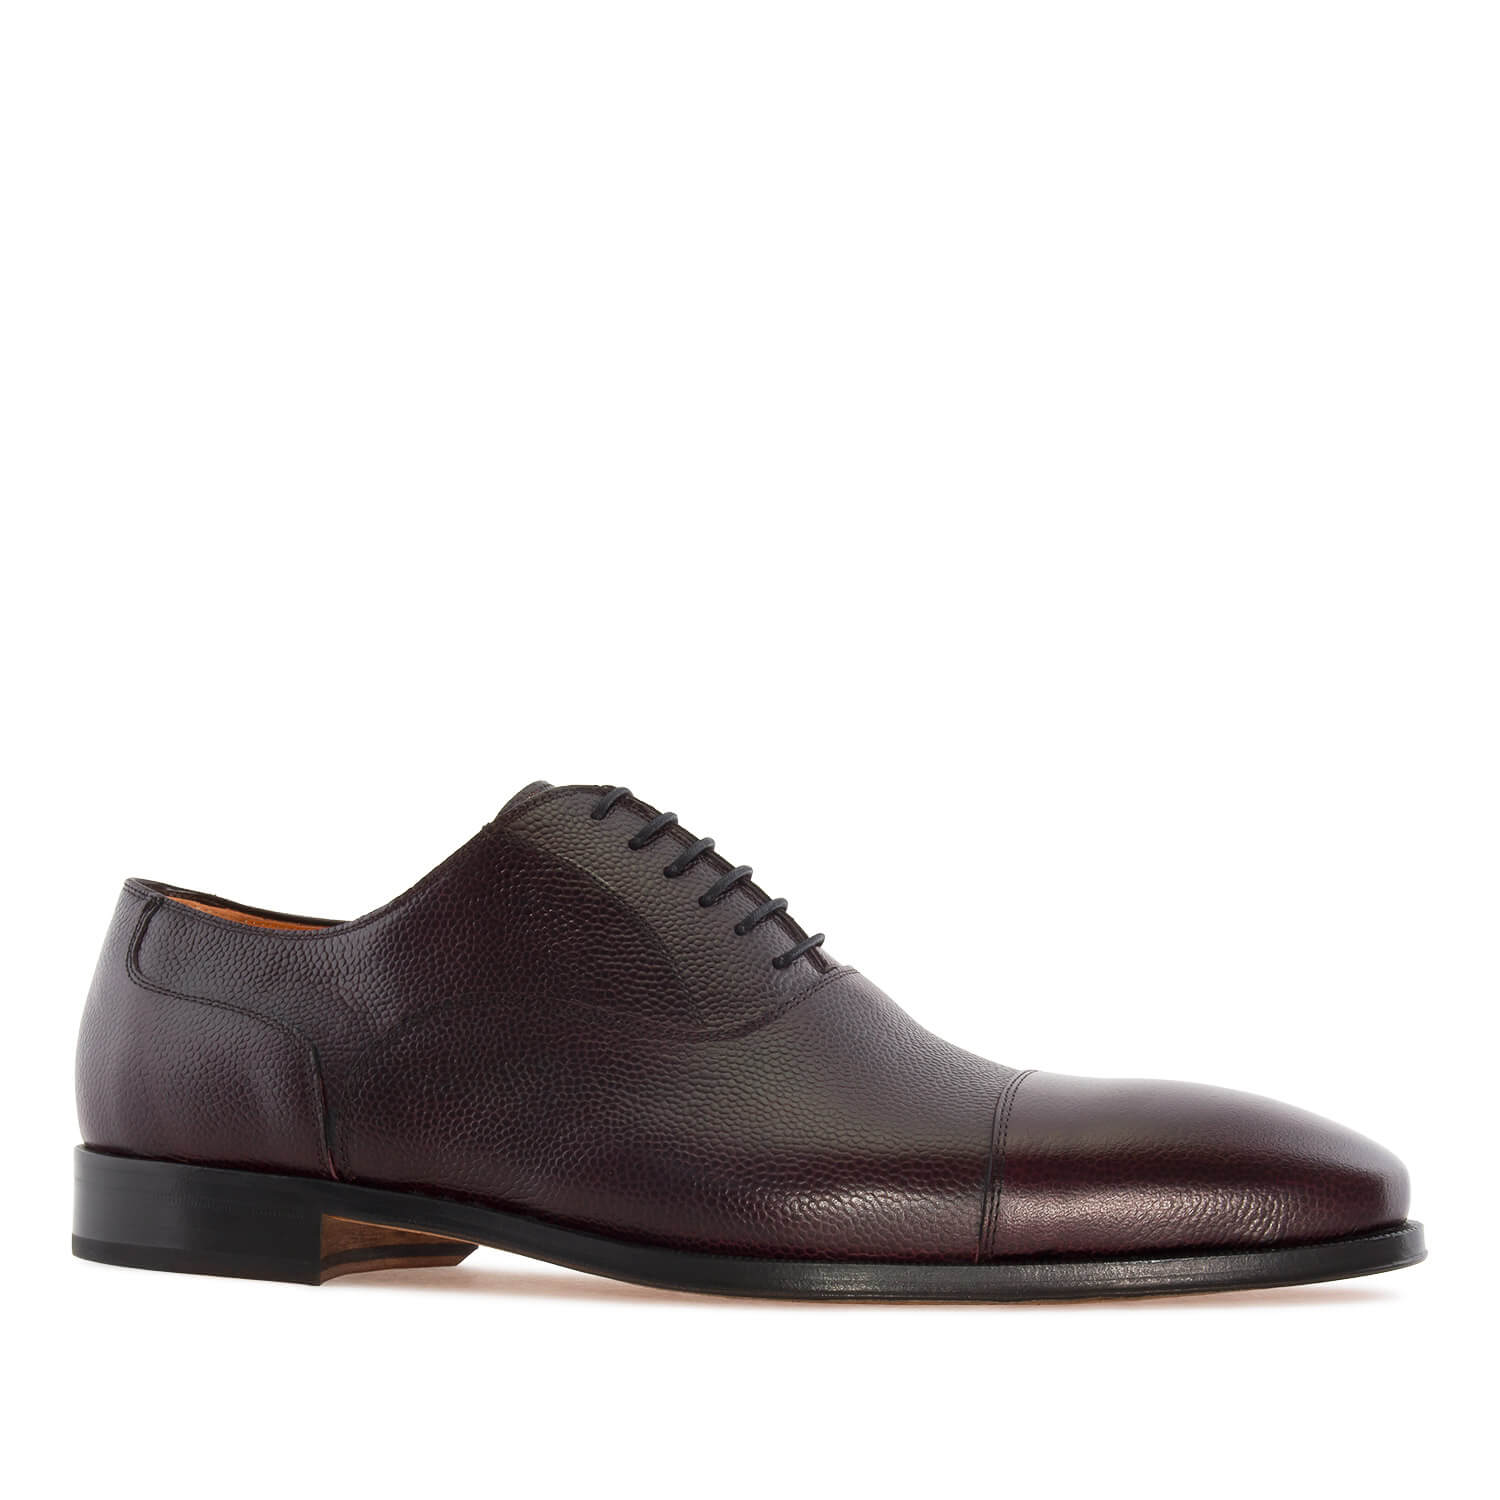 Oxford style Shoes in Burgundy-Brown Leather 